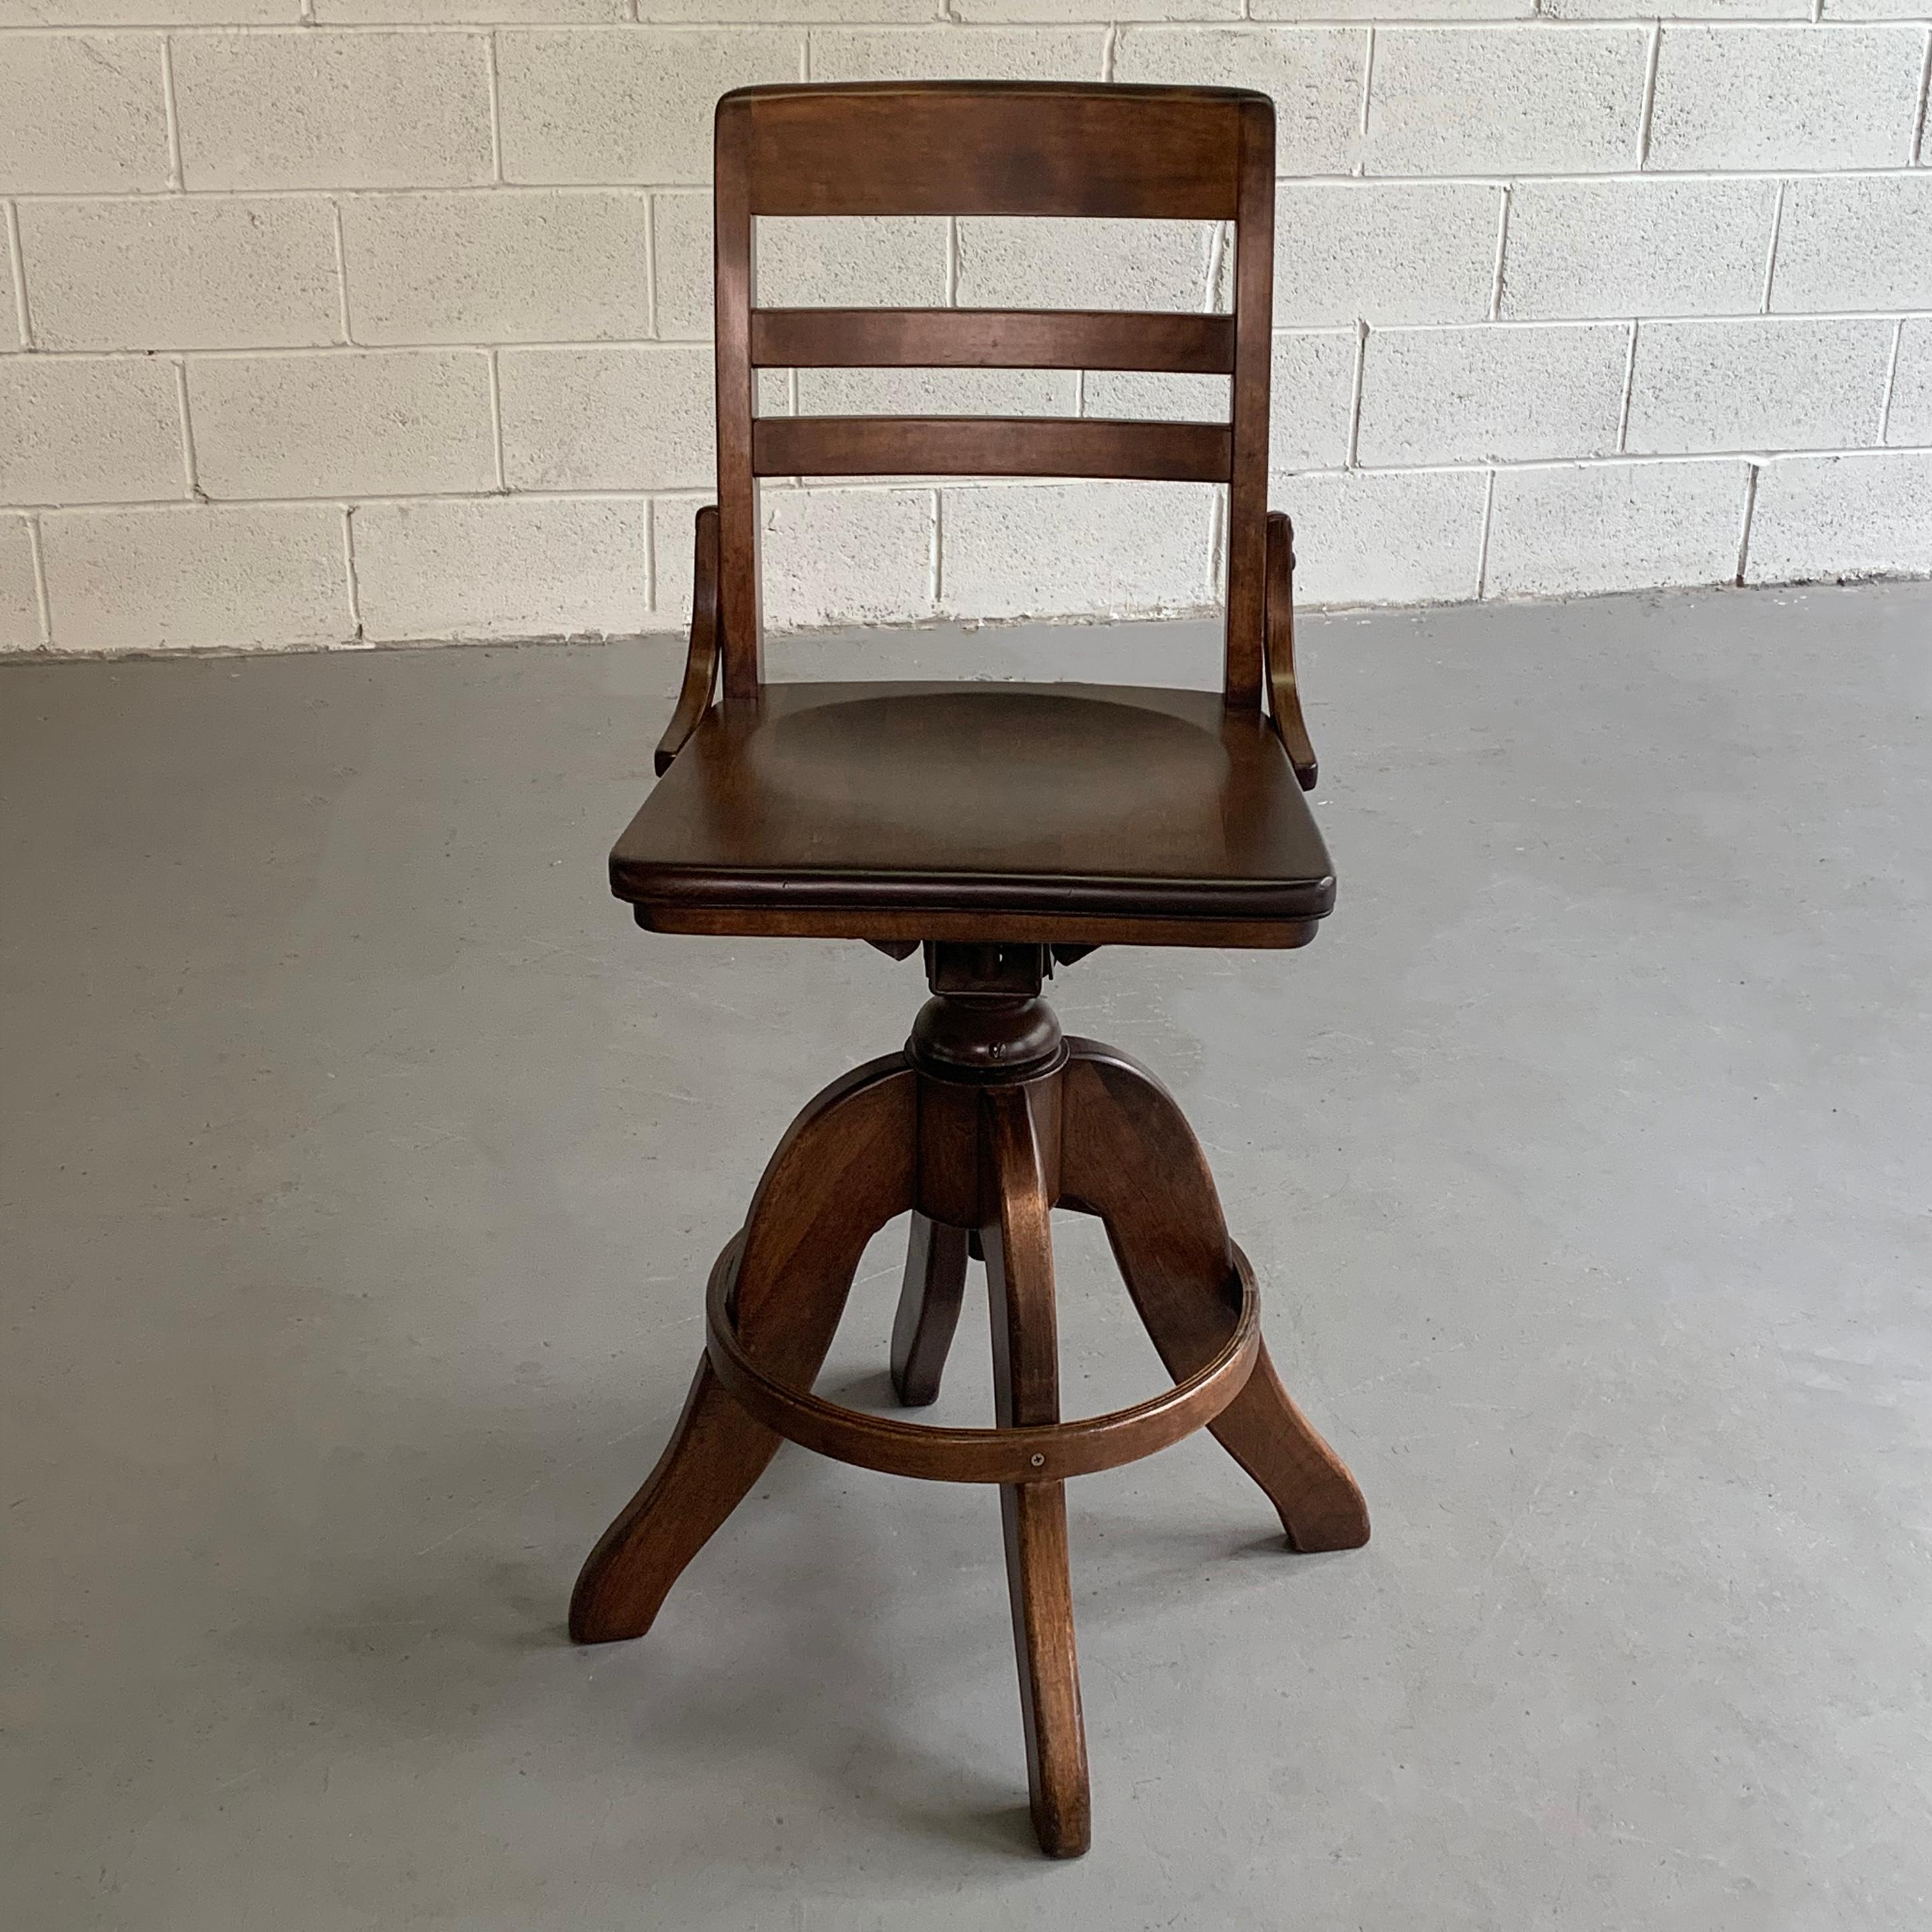 Industrial, stained maple, drafting stool features a swivel seat and height adjustability from 25 - 29 inches.